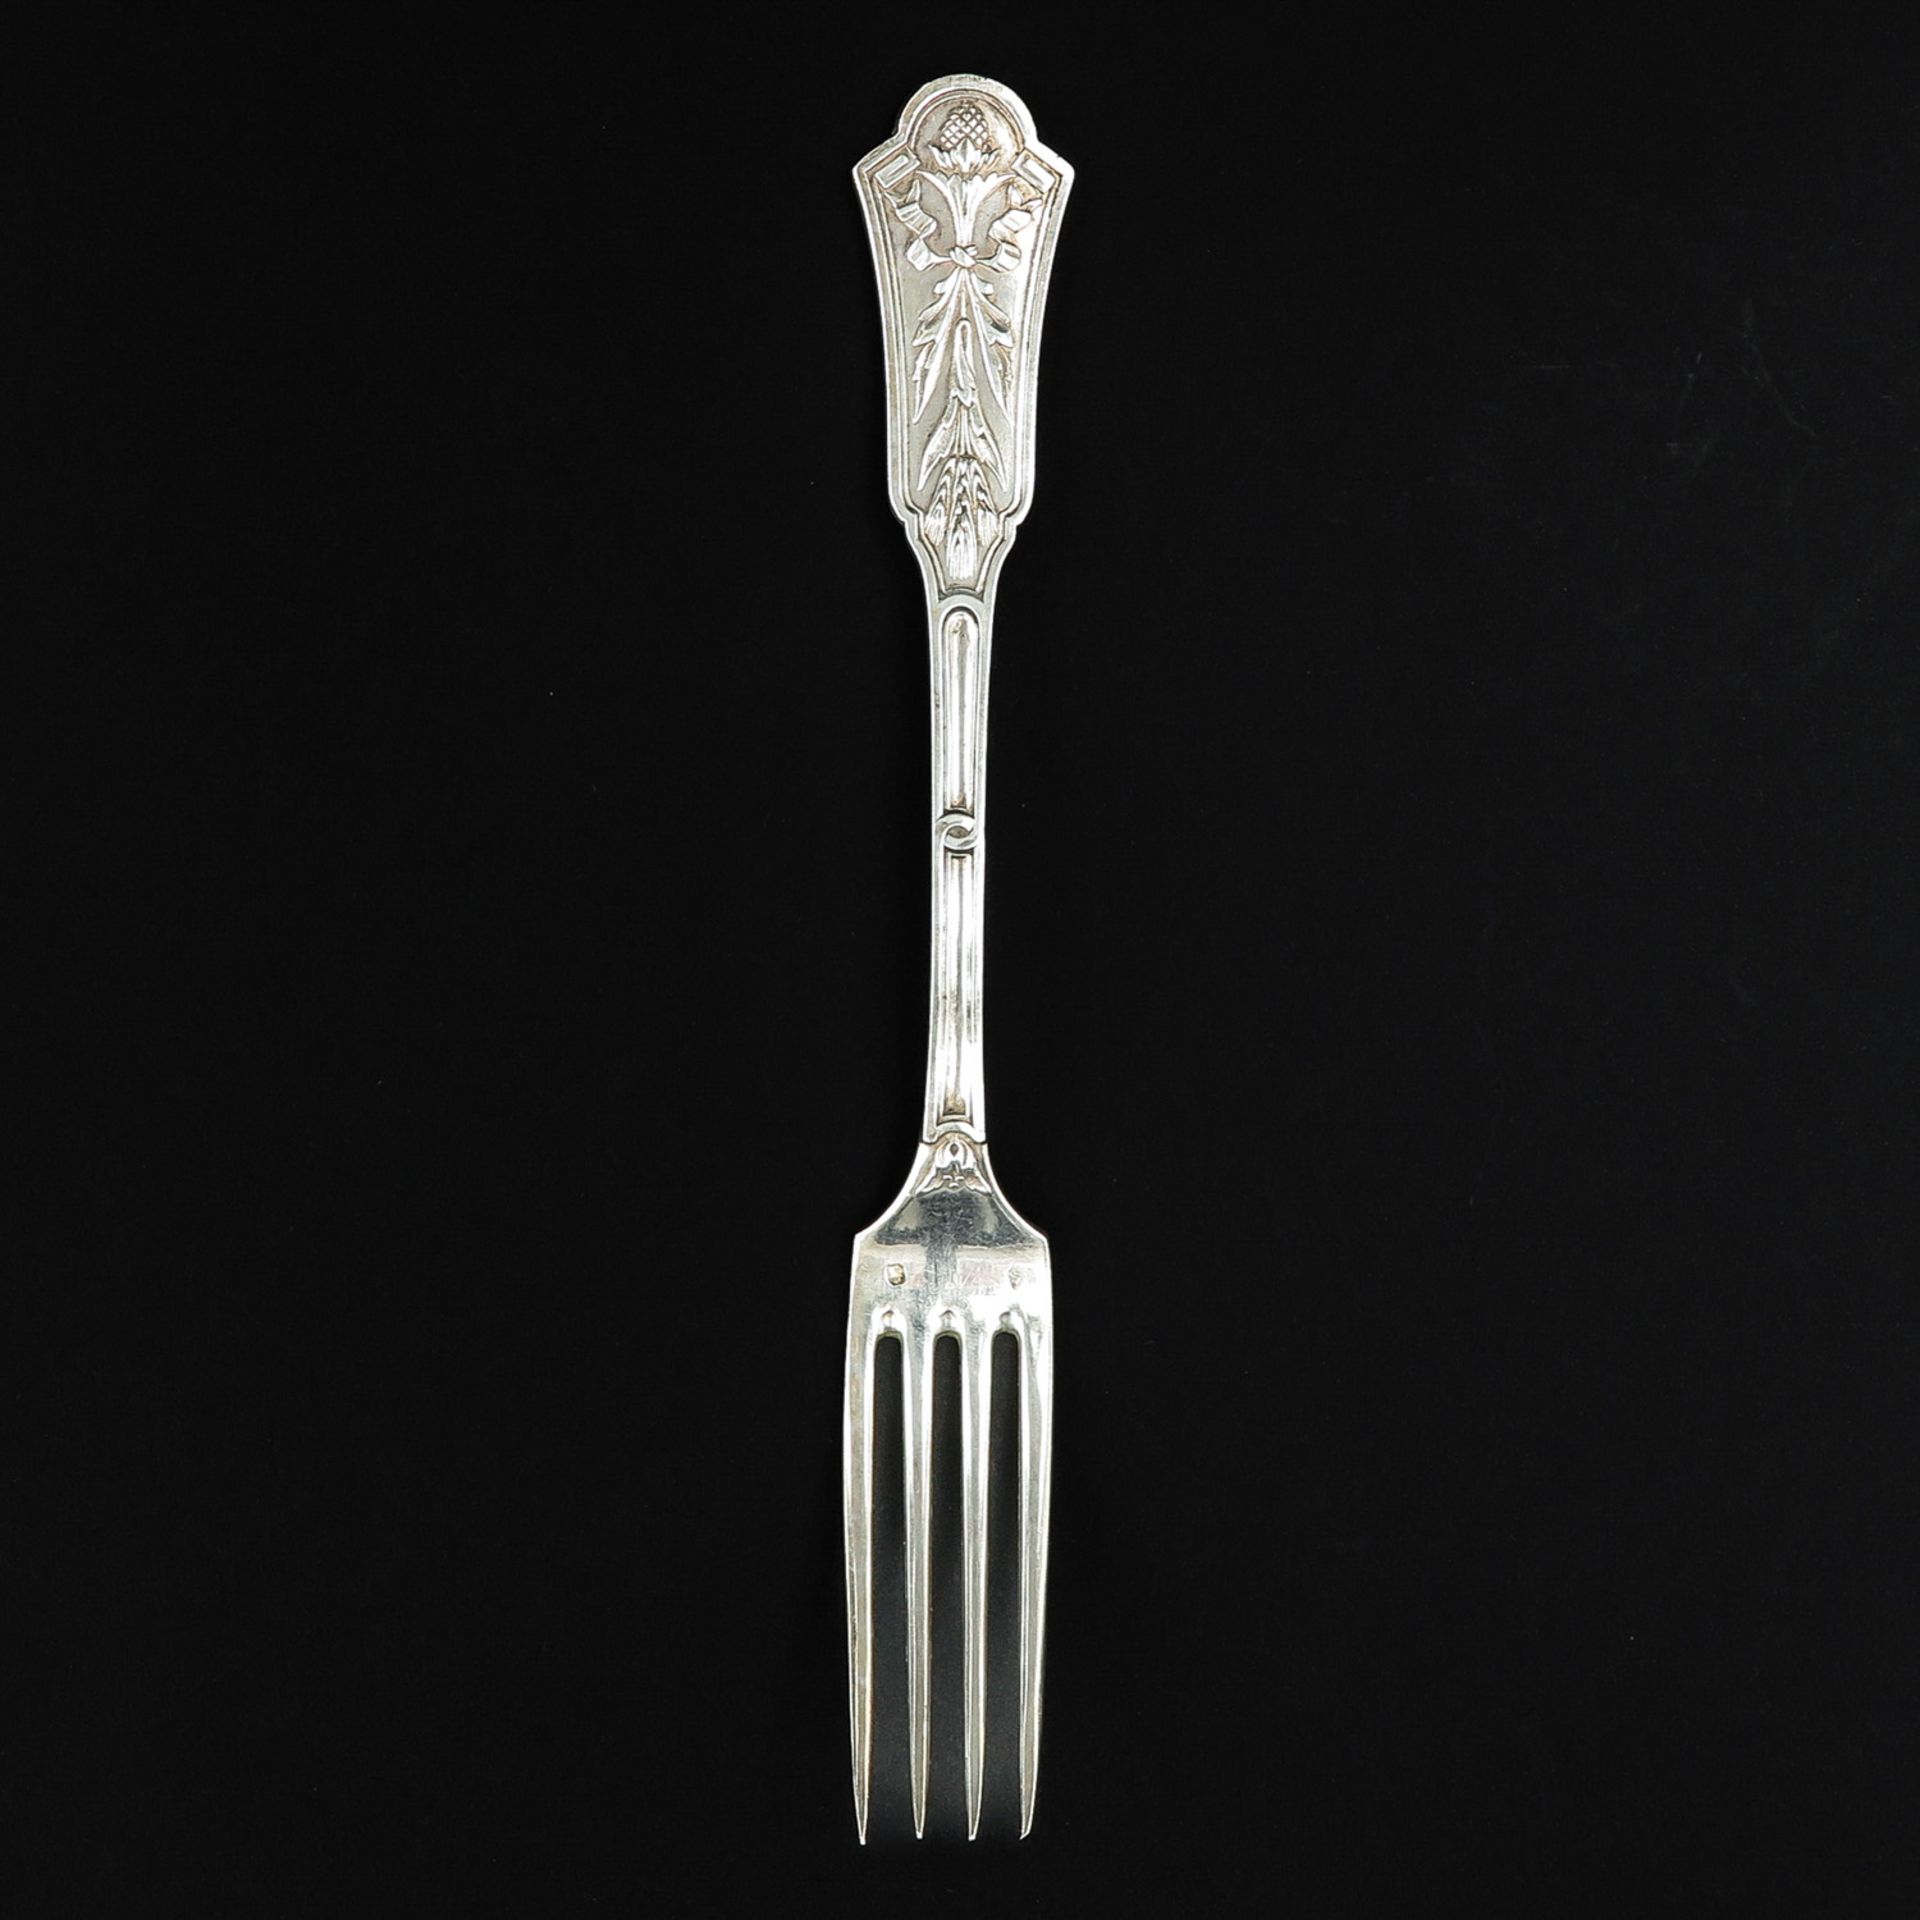 A Silver 6 Piece Place Cutlery Set - Image 3 of 8